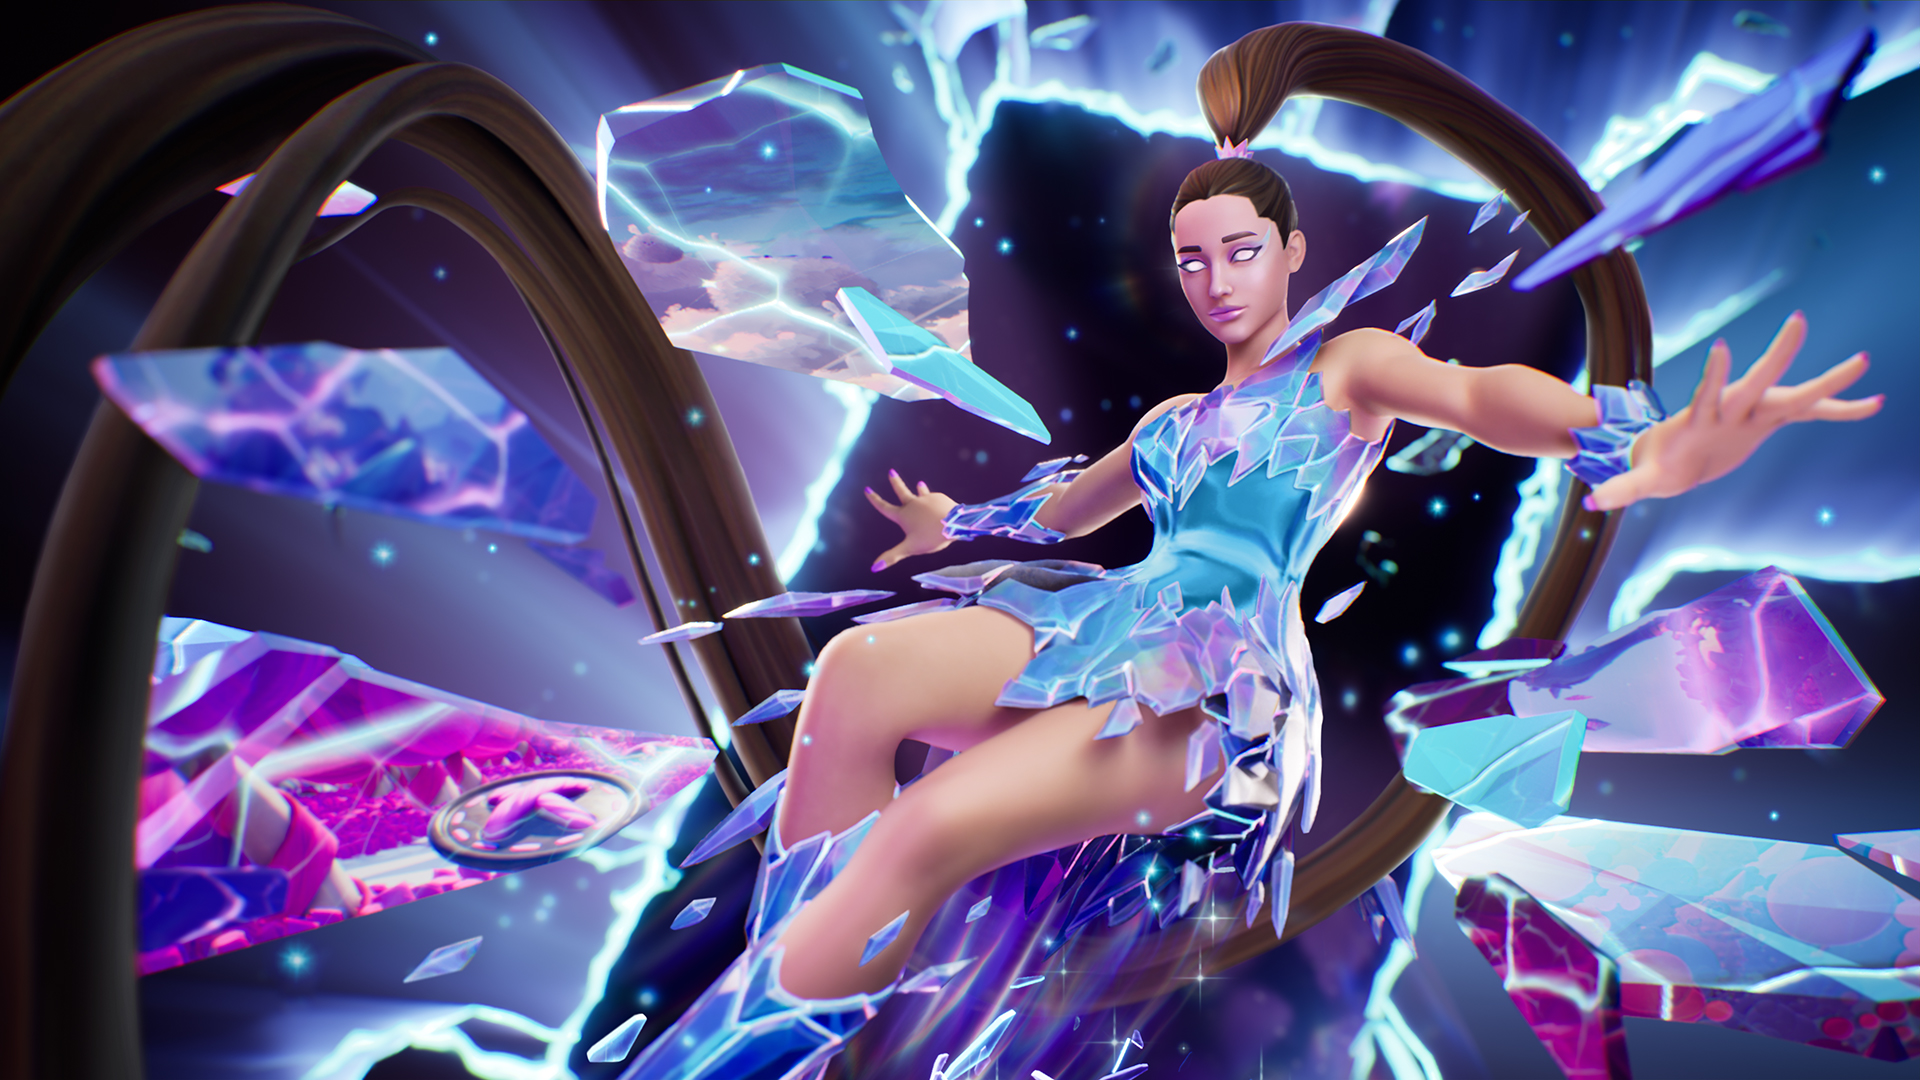 Ariana Grande’s Fortnite event takes players all over the Rift